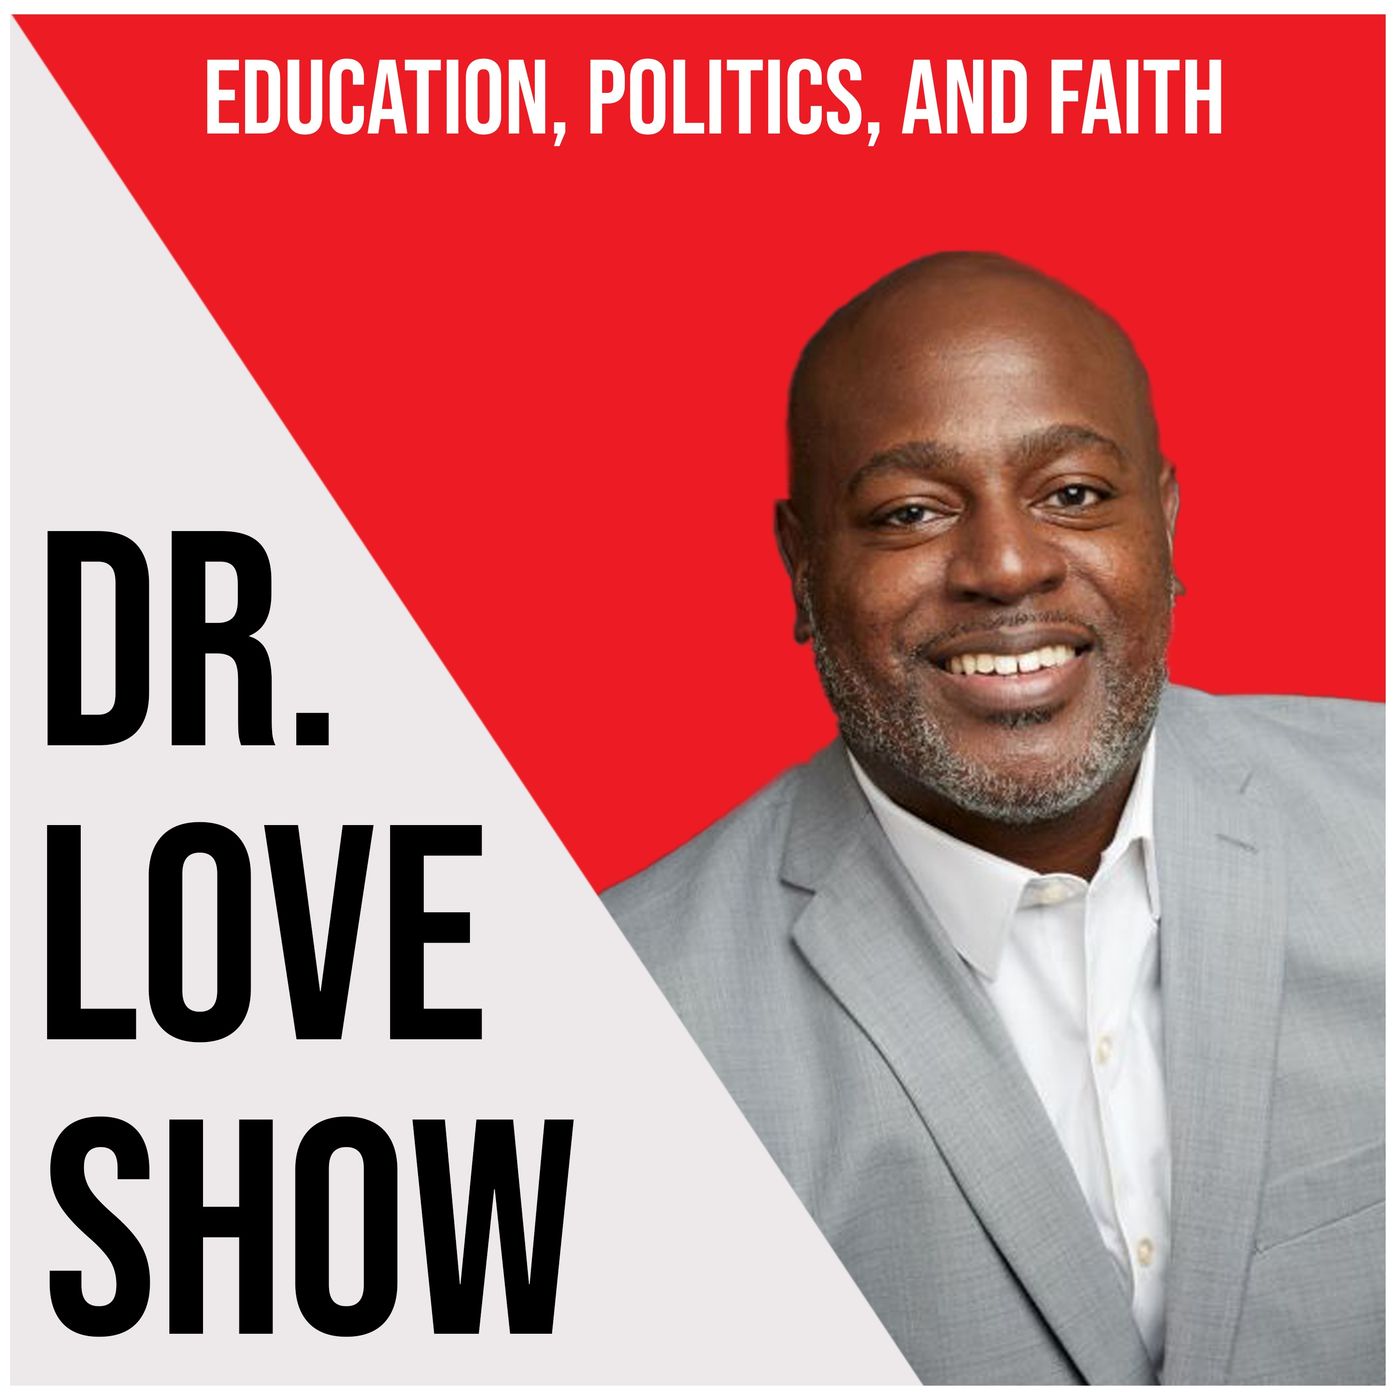 Dr. Love Show "You Win" Podcast #2